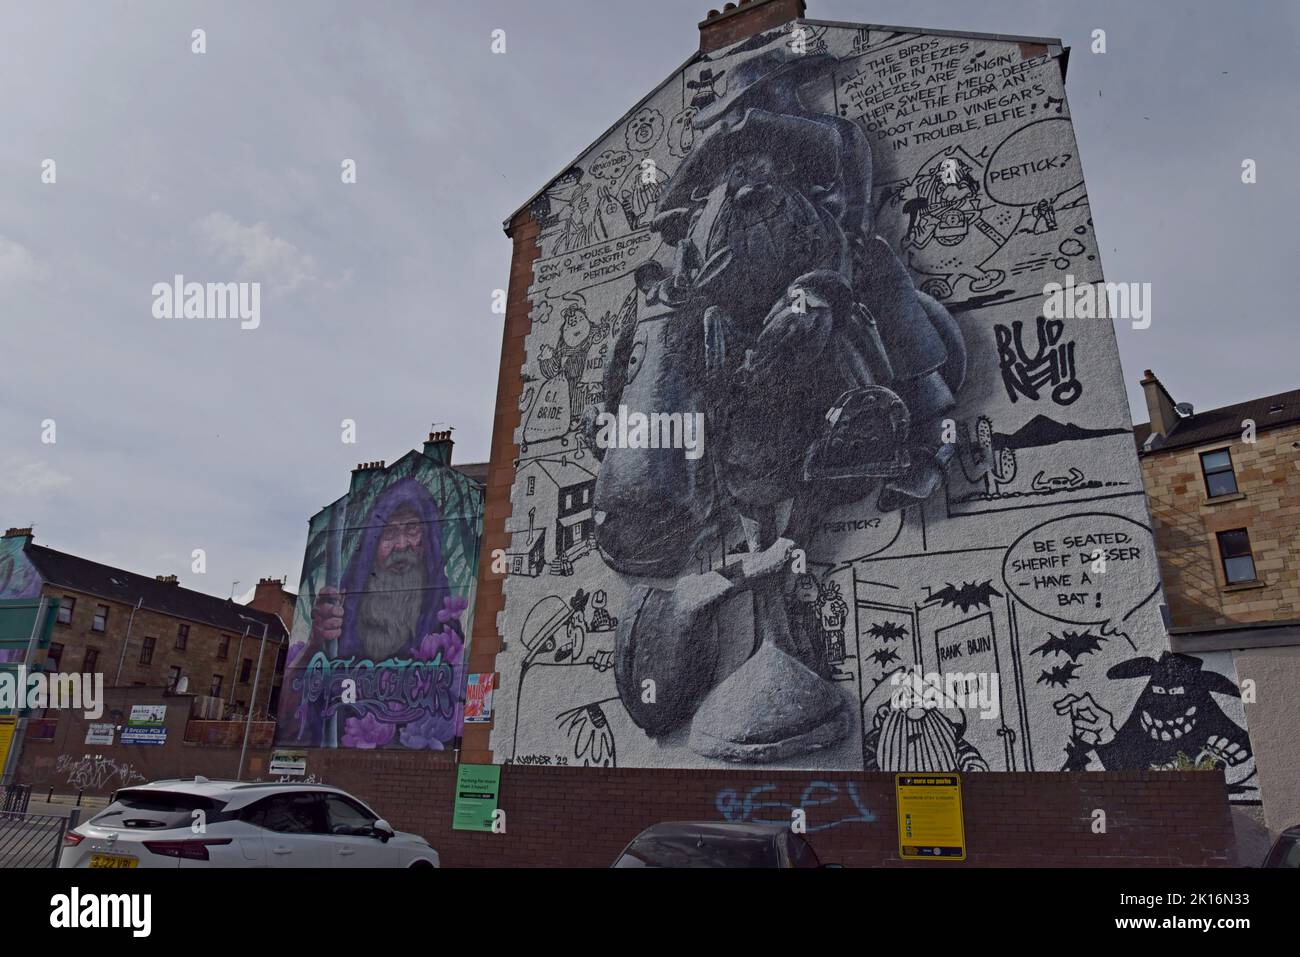 Gable end Mural depicting Lobey Dosser, from local artist Bud Neill,  part of the Yardworks GRID Project in Merkland Court, Partick, Glasgow, UK Stock Photo